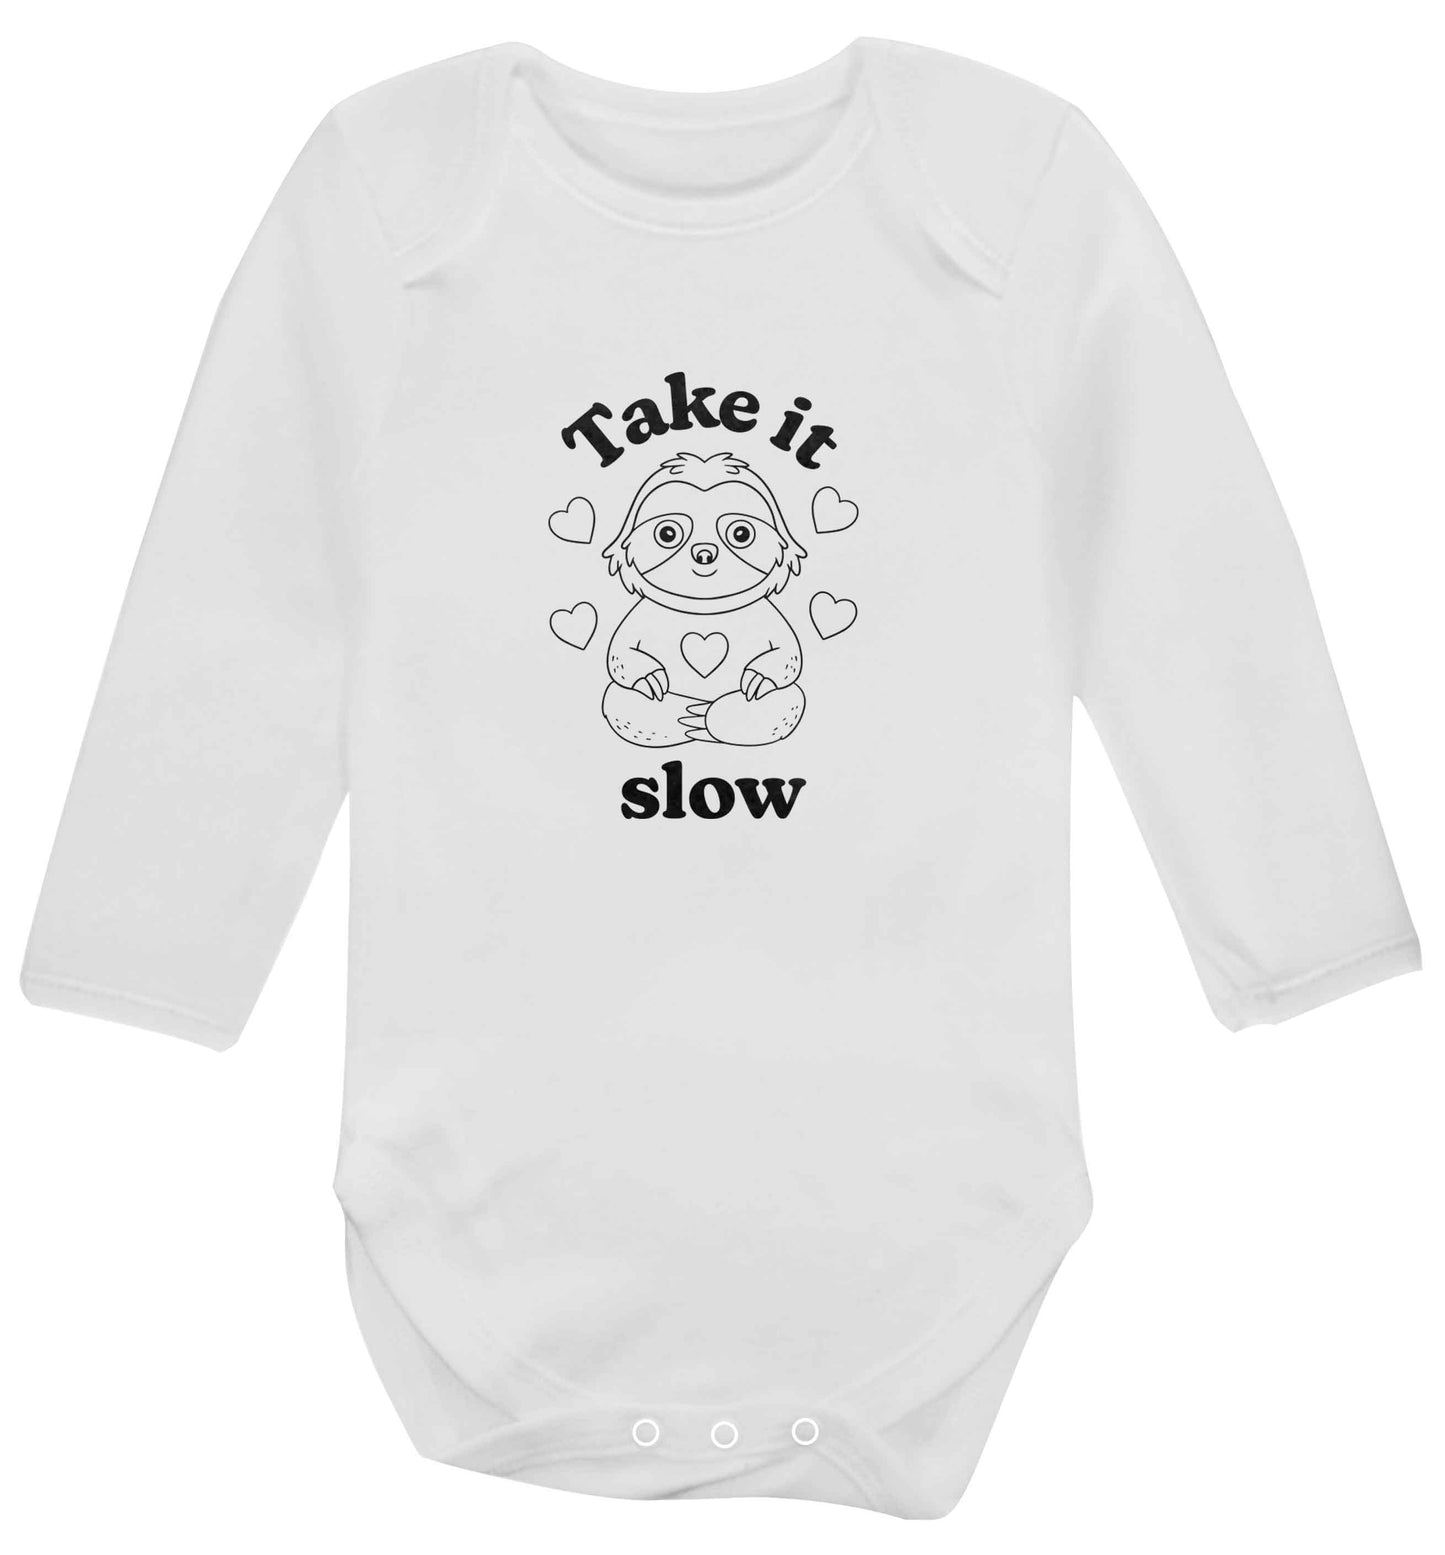 Take it slow baby vest long sleeved white 6-12 months